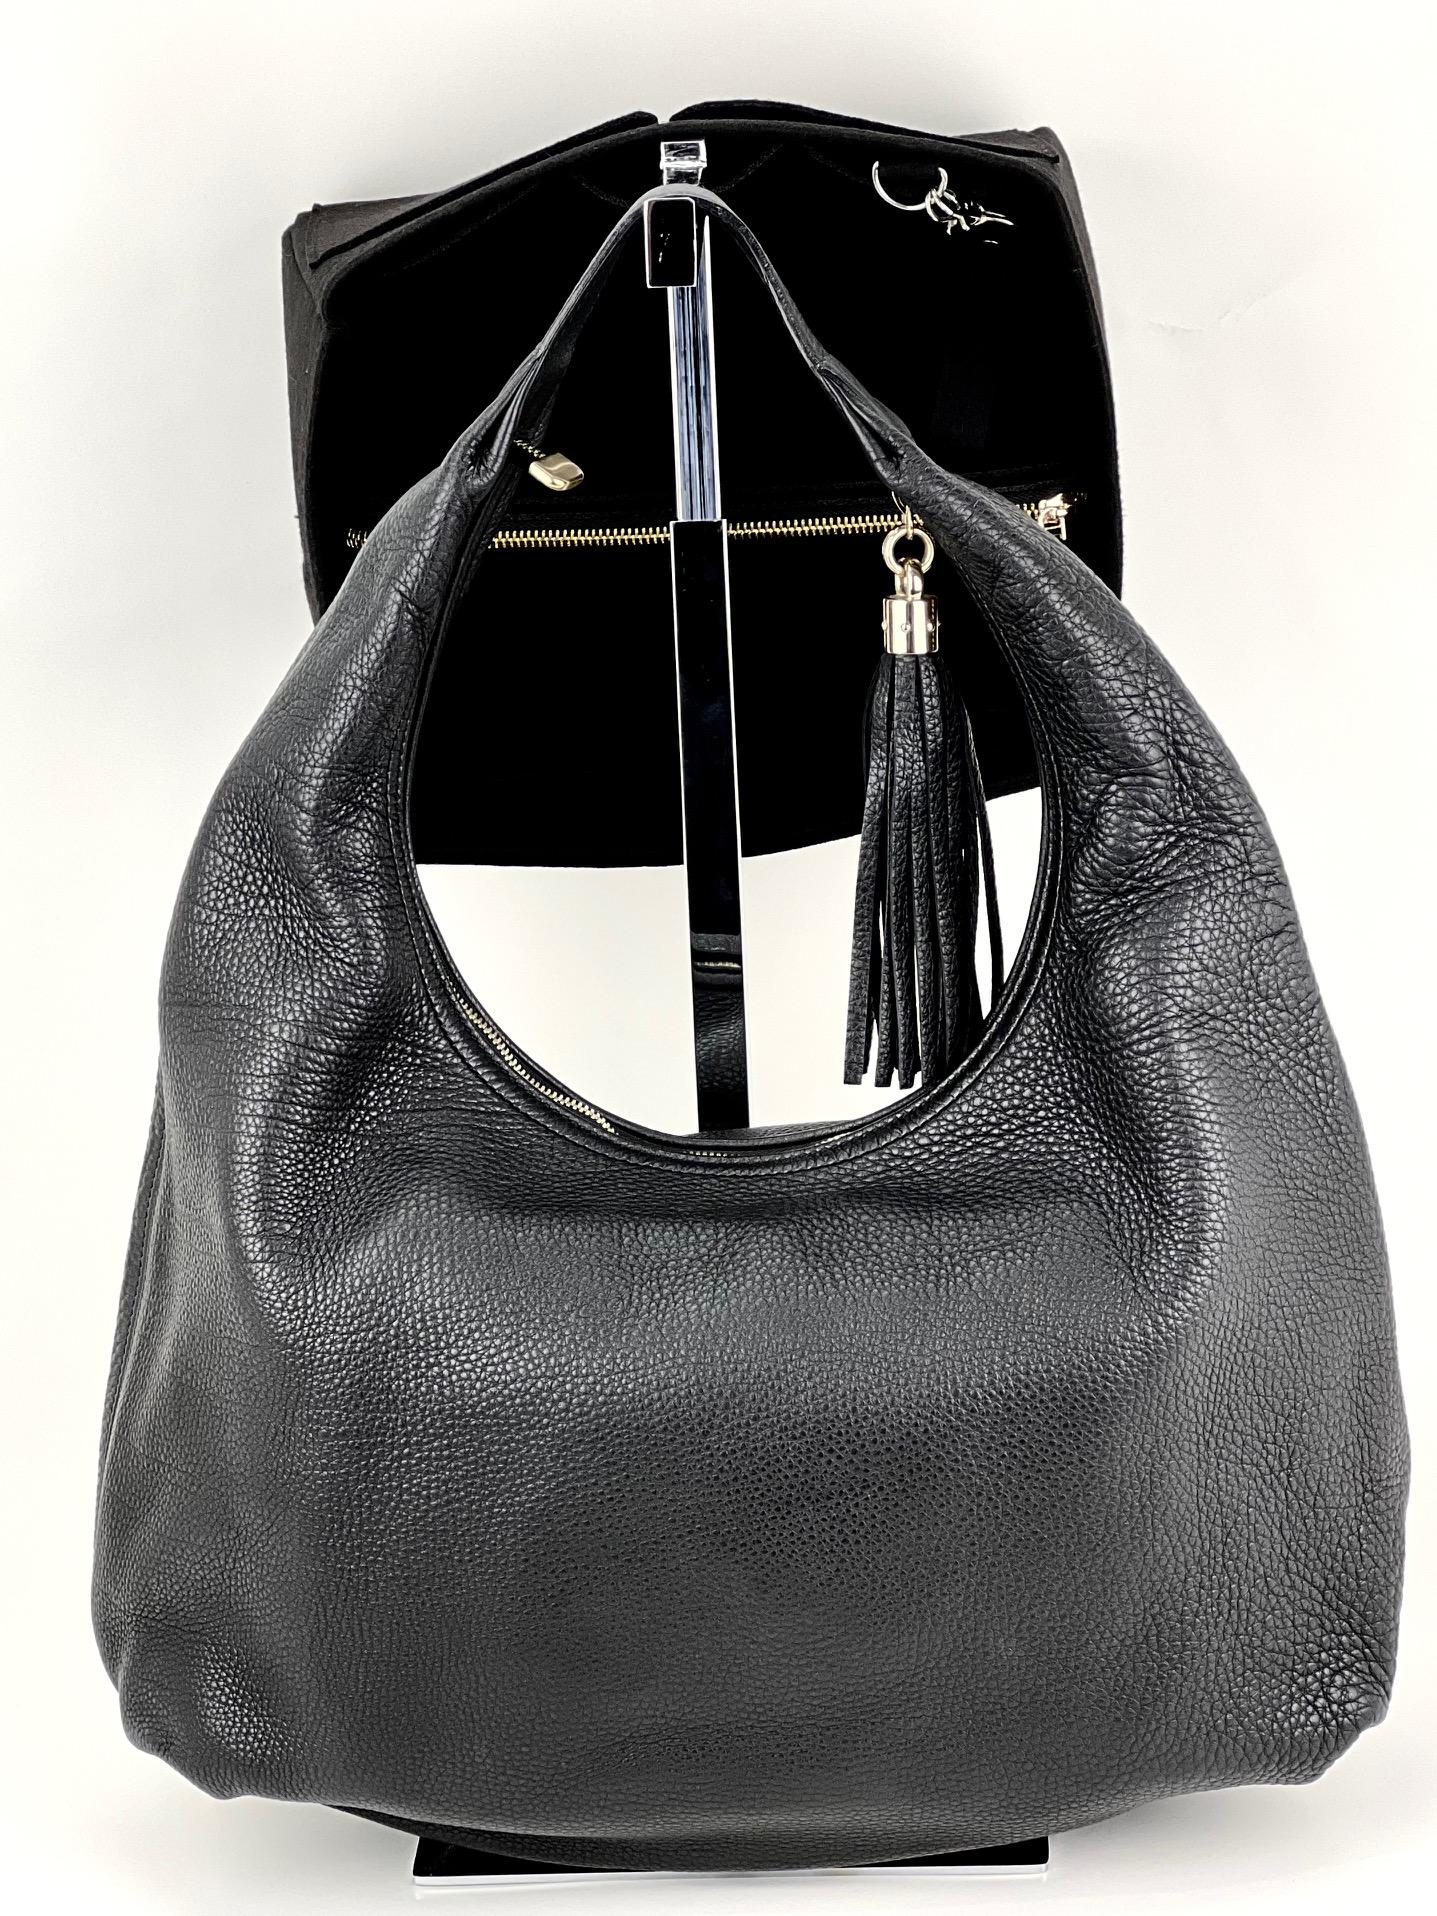 Pre-Owned  100% Authentic
GUCCI Large Soho Hobo Black Pebbled Calfskin
Top Handle Tassel Added Insert to help keep shape
and organize
RATING: A...Excellent, near mint, only
slight signs of wear
MATERIAL: Calfskin Leather
HANDLE: single leather